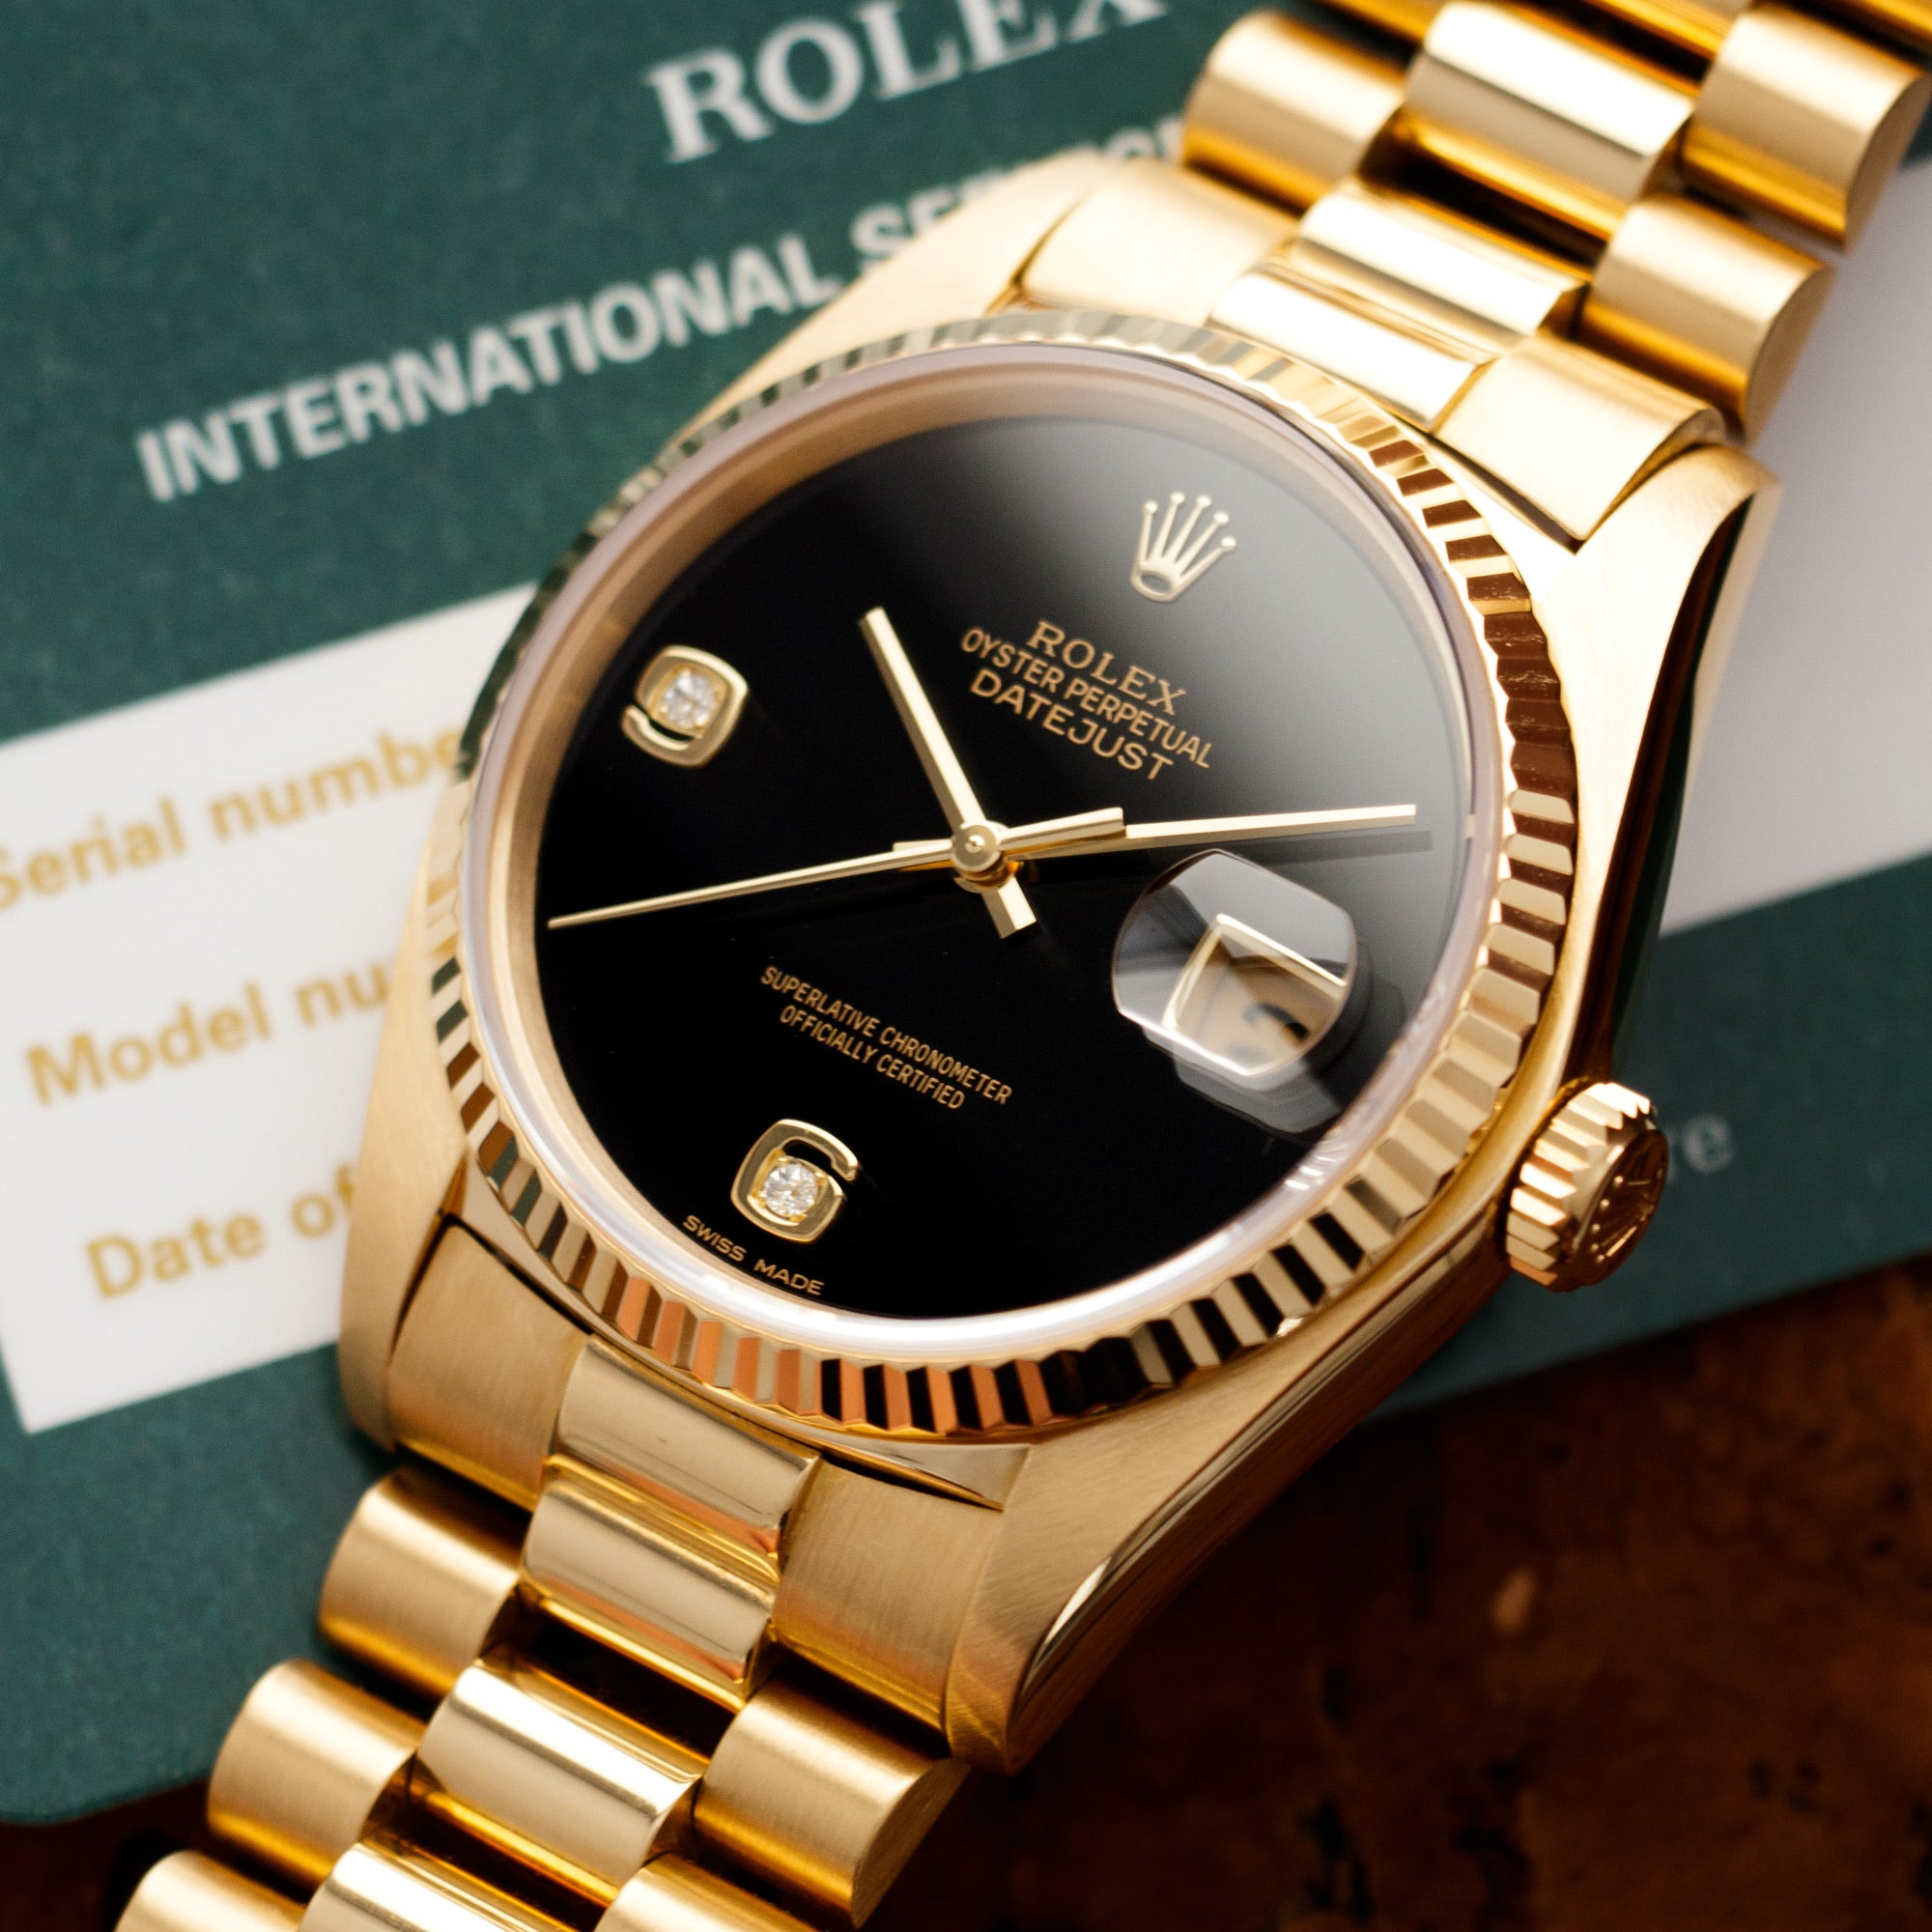 Rolex - Rolex Yellow Gold Datejust Watch Ref. 16018 with Onyx Dial - The Keystone Watches